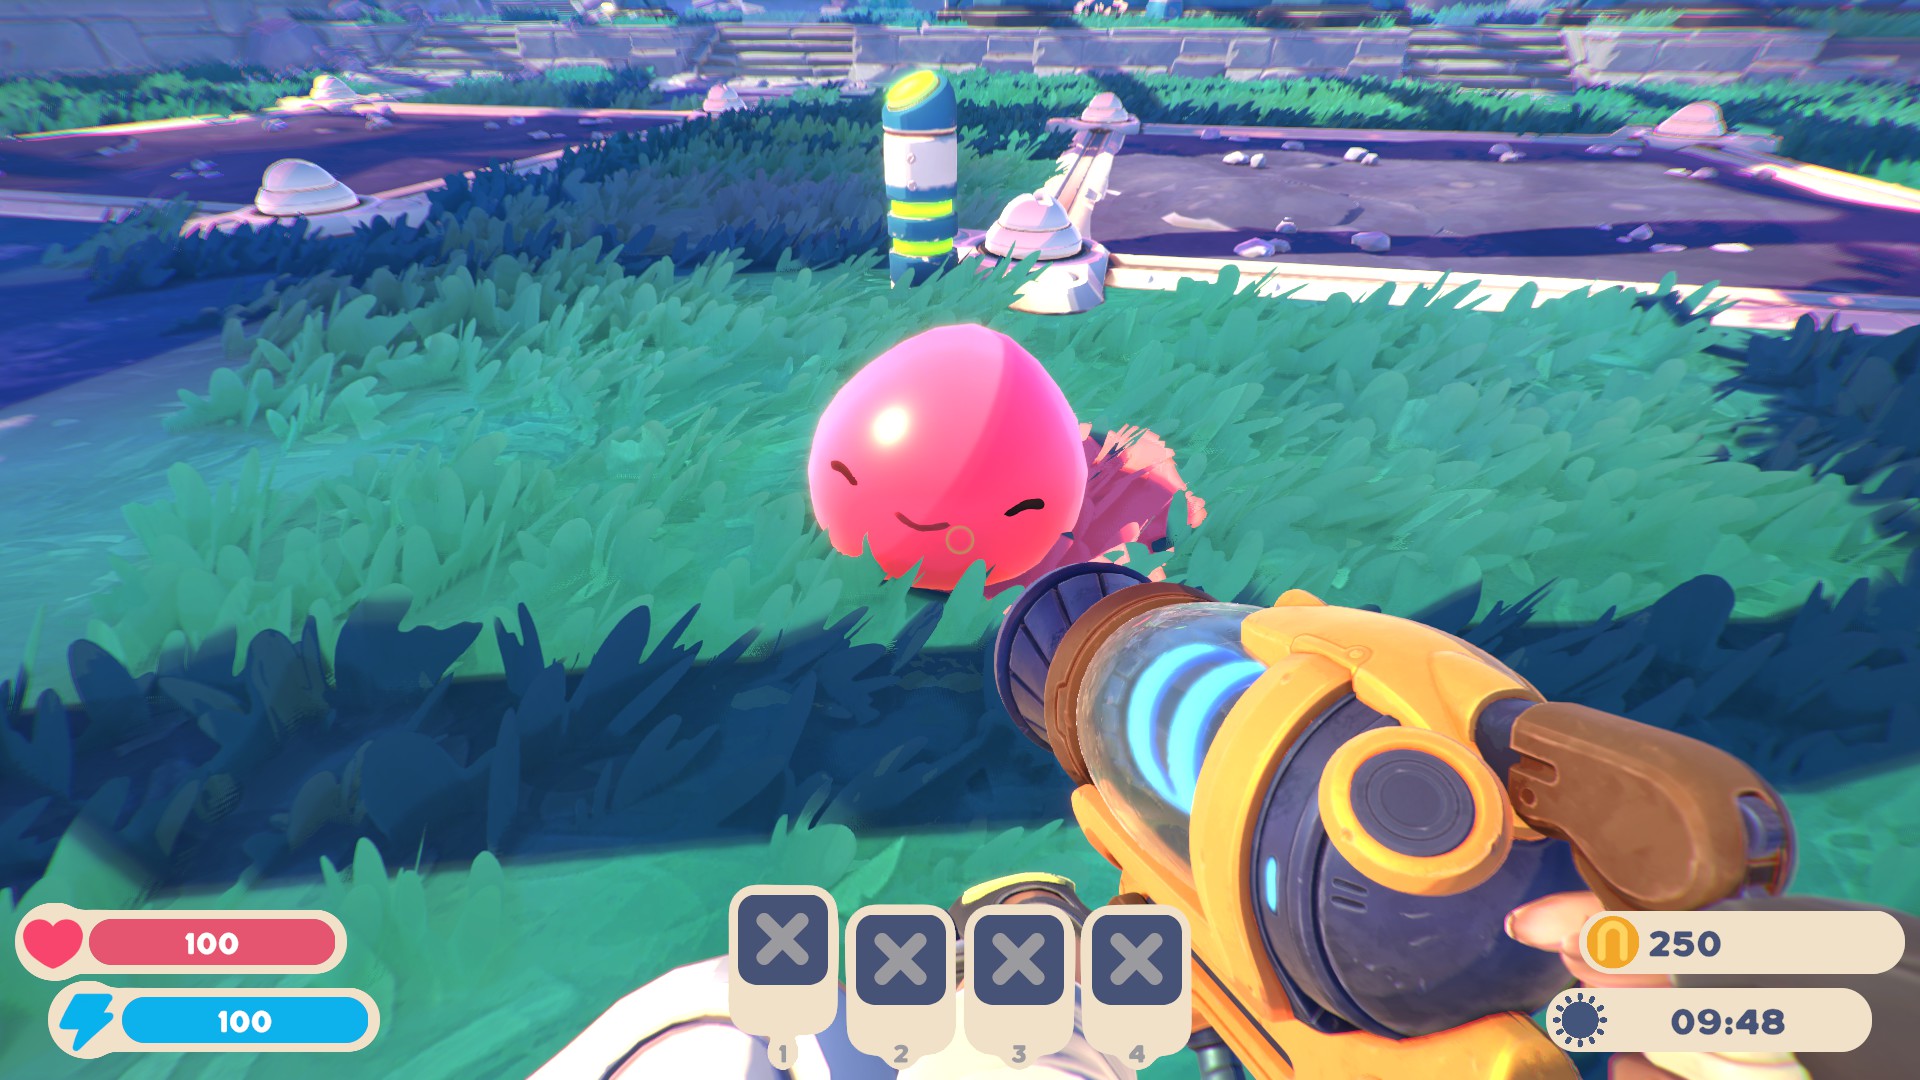 Slime Rancher 2 - All Species Full Guide - Pink Slime - AE73E69